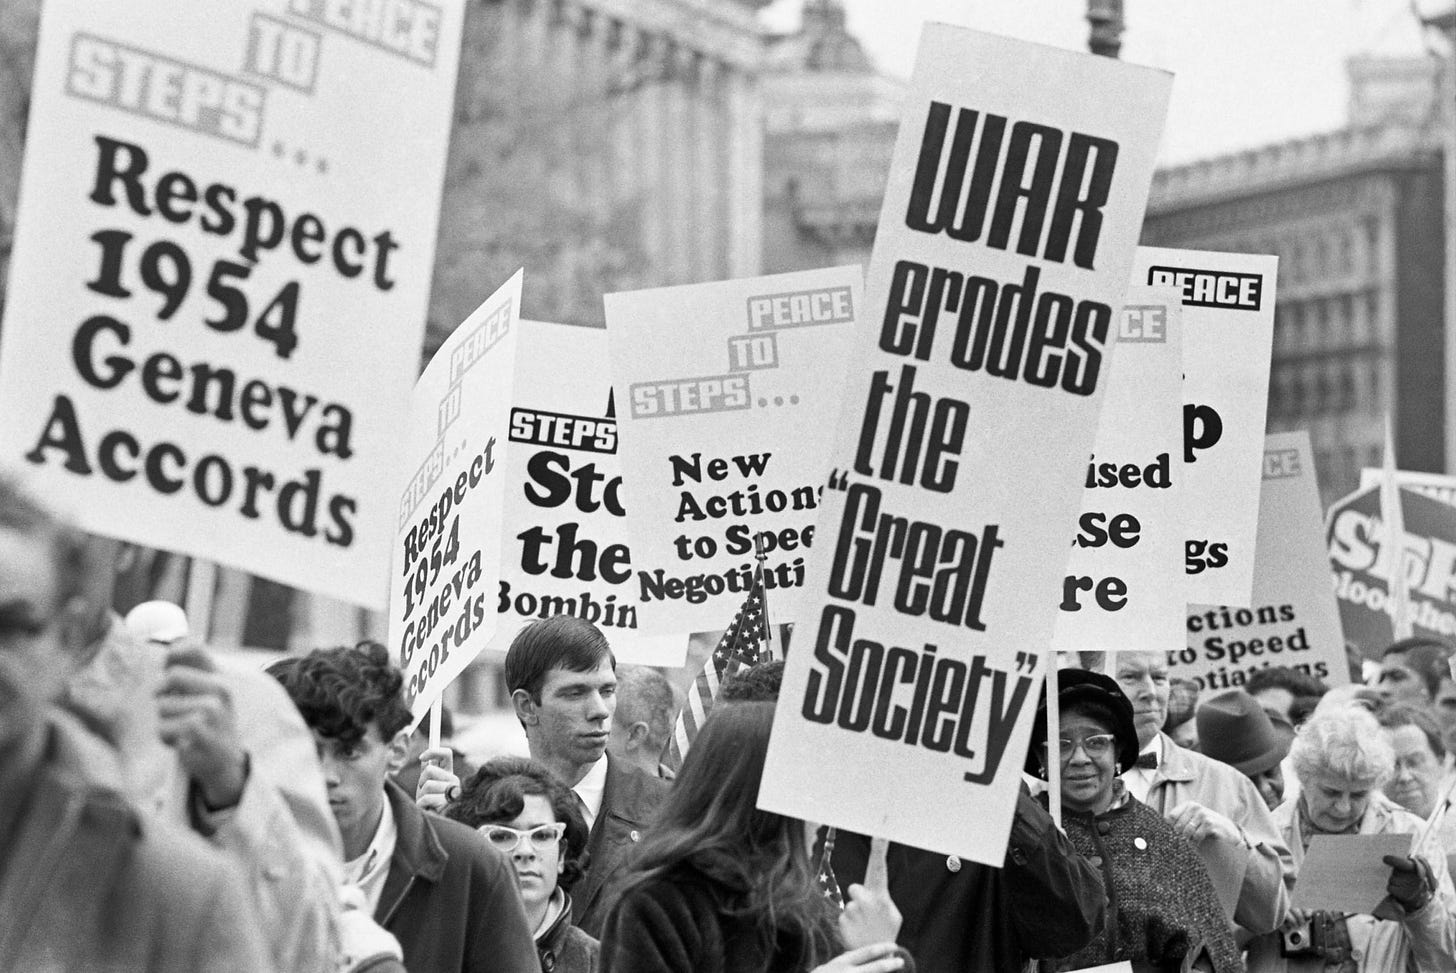 For Vietnam War Protesters, the Price of Peace Is Confusion | The New Yorker